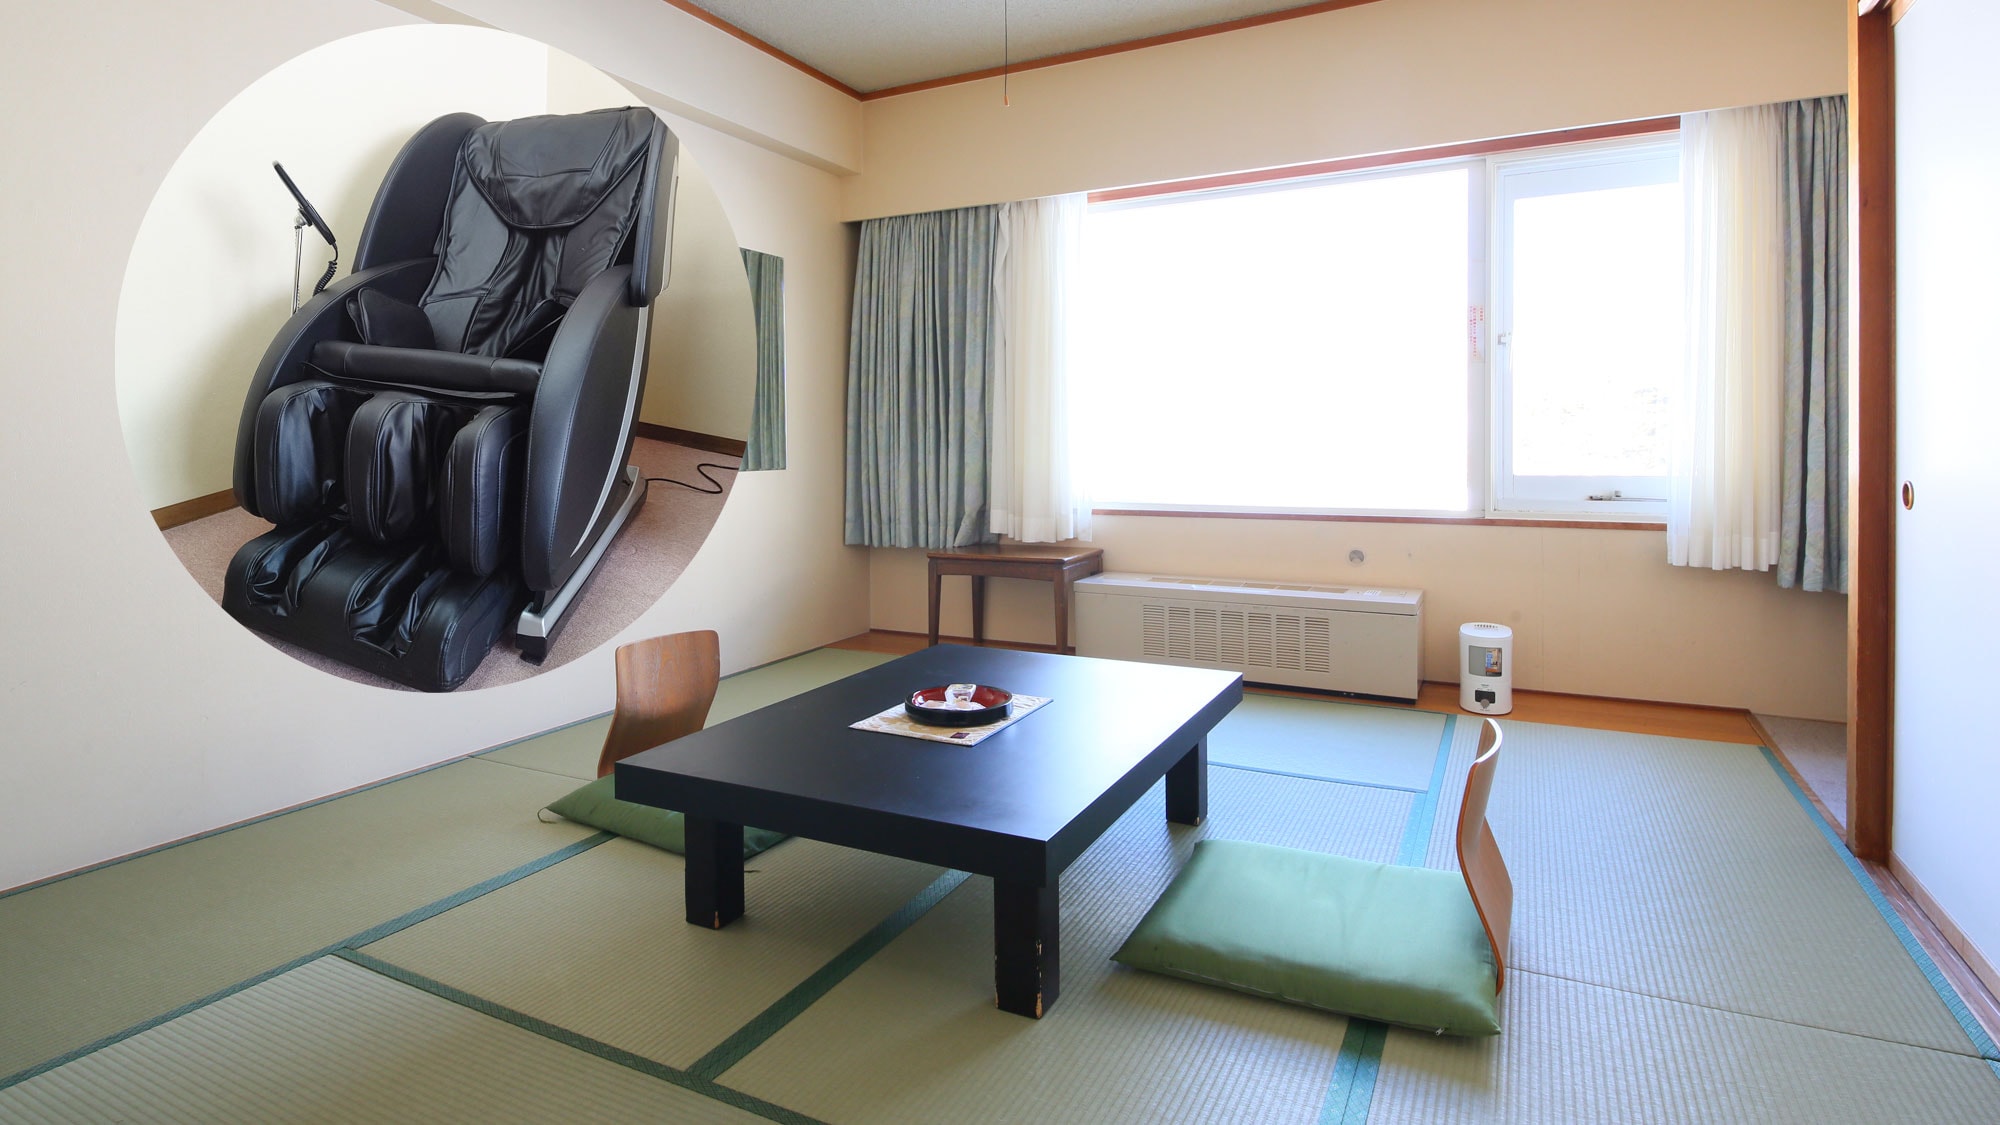 [Room] ★ With massage chair ★ Japanese-style room 8 tatami mats